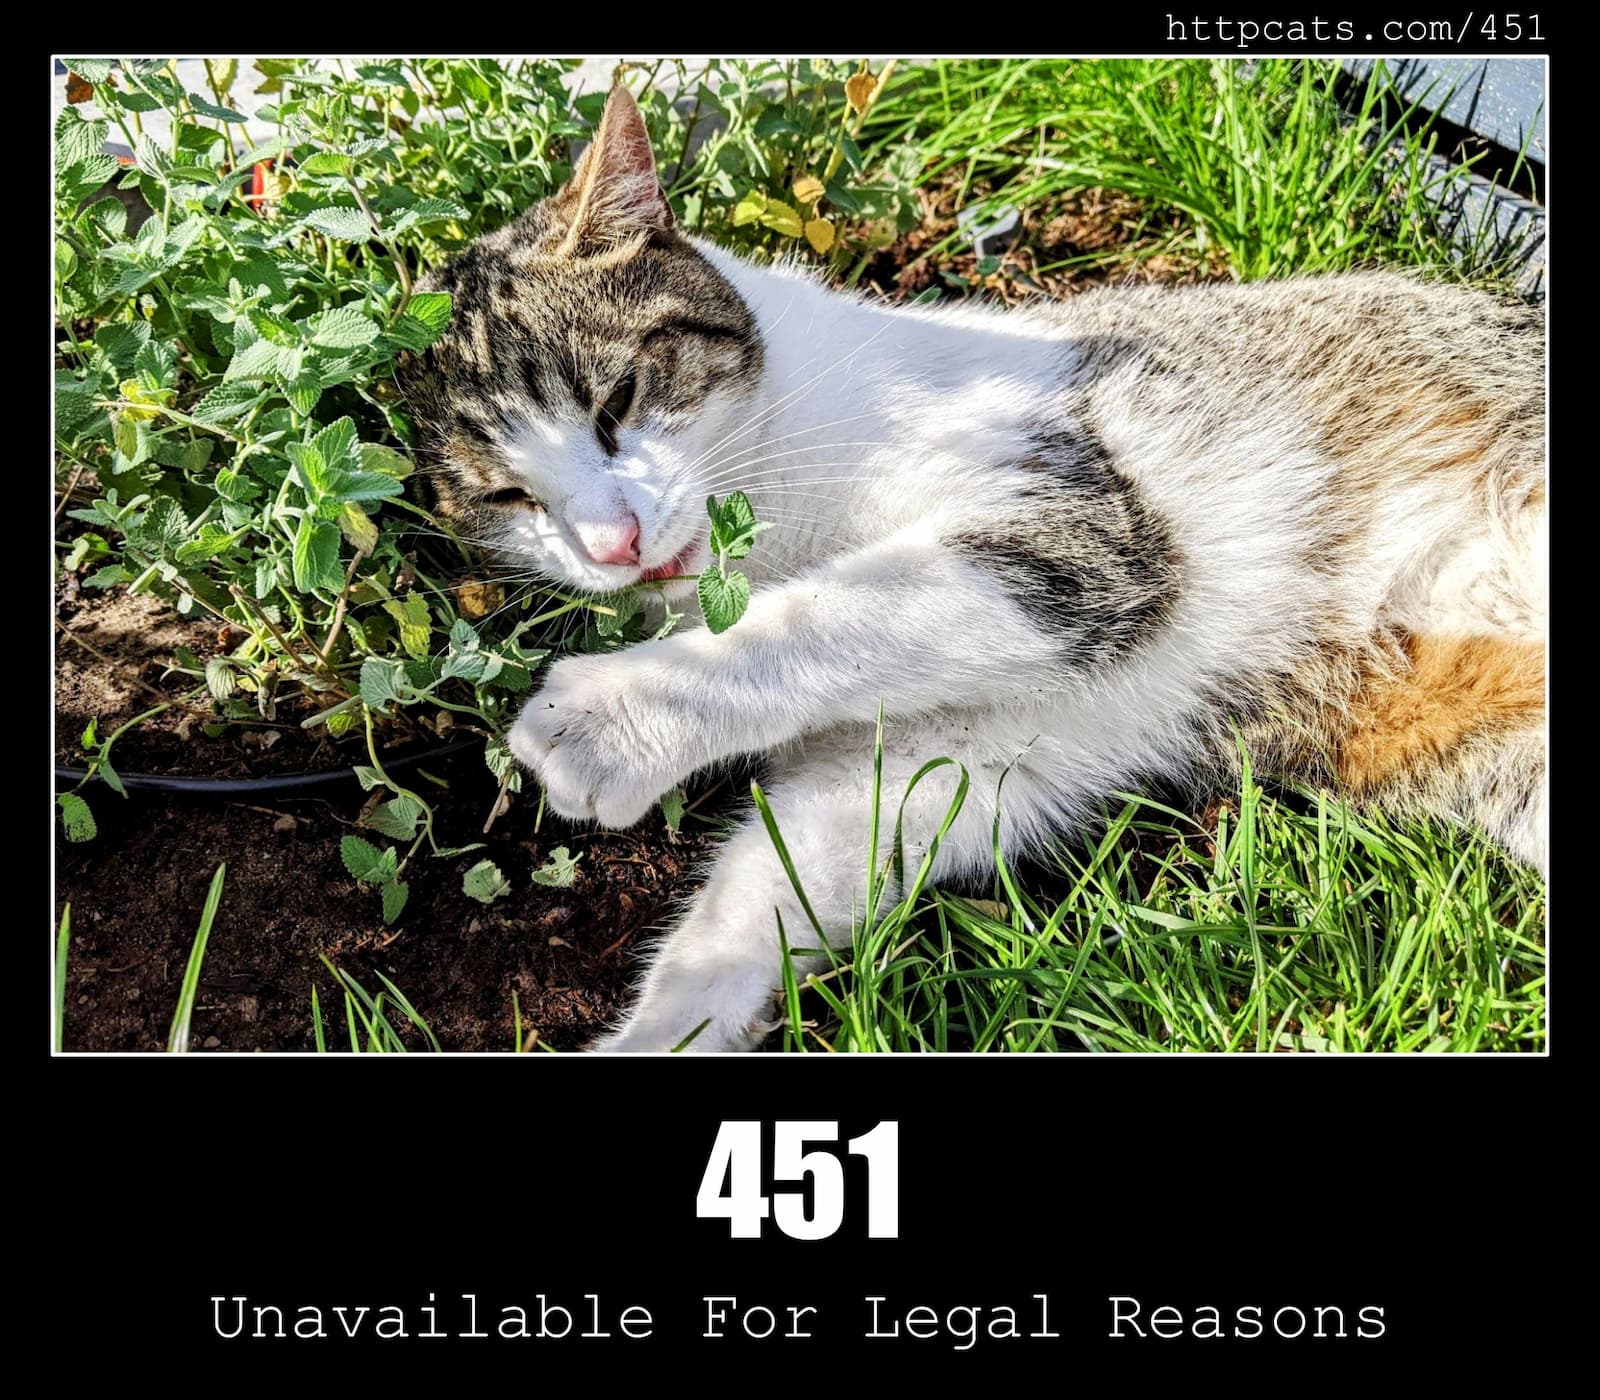 HTTP Status Code 451 Unavailable For Legal Reasons & Cats